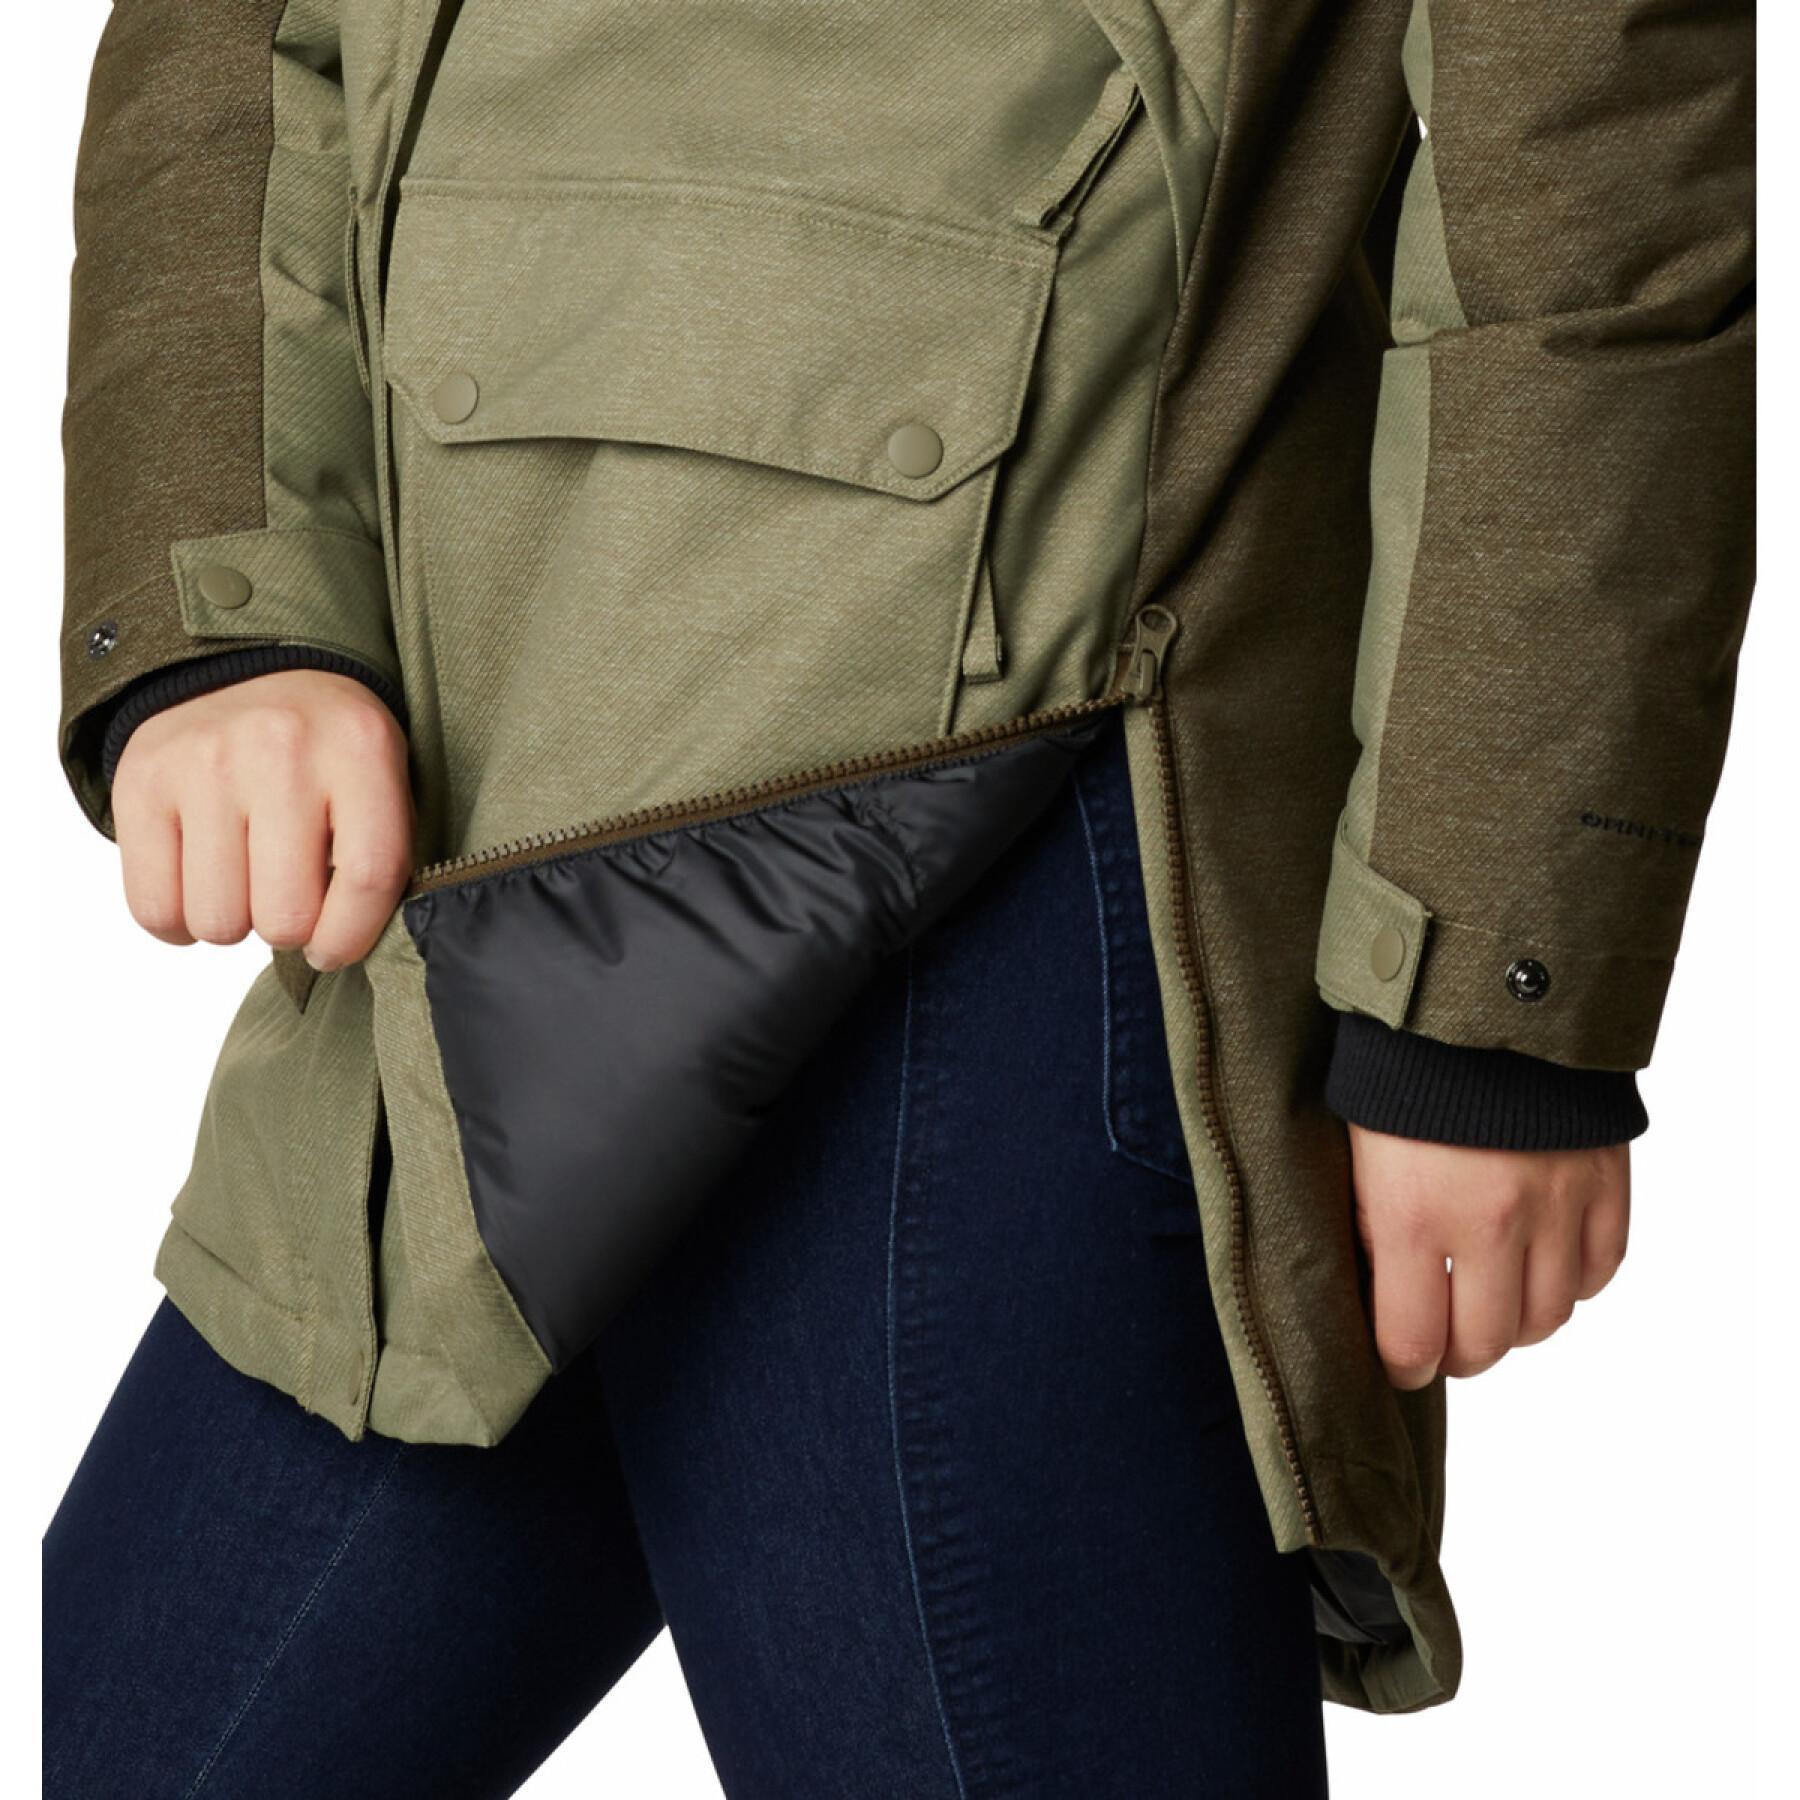 Parka impermeable para mujer Columbia Mount Si Down